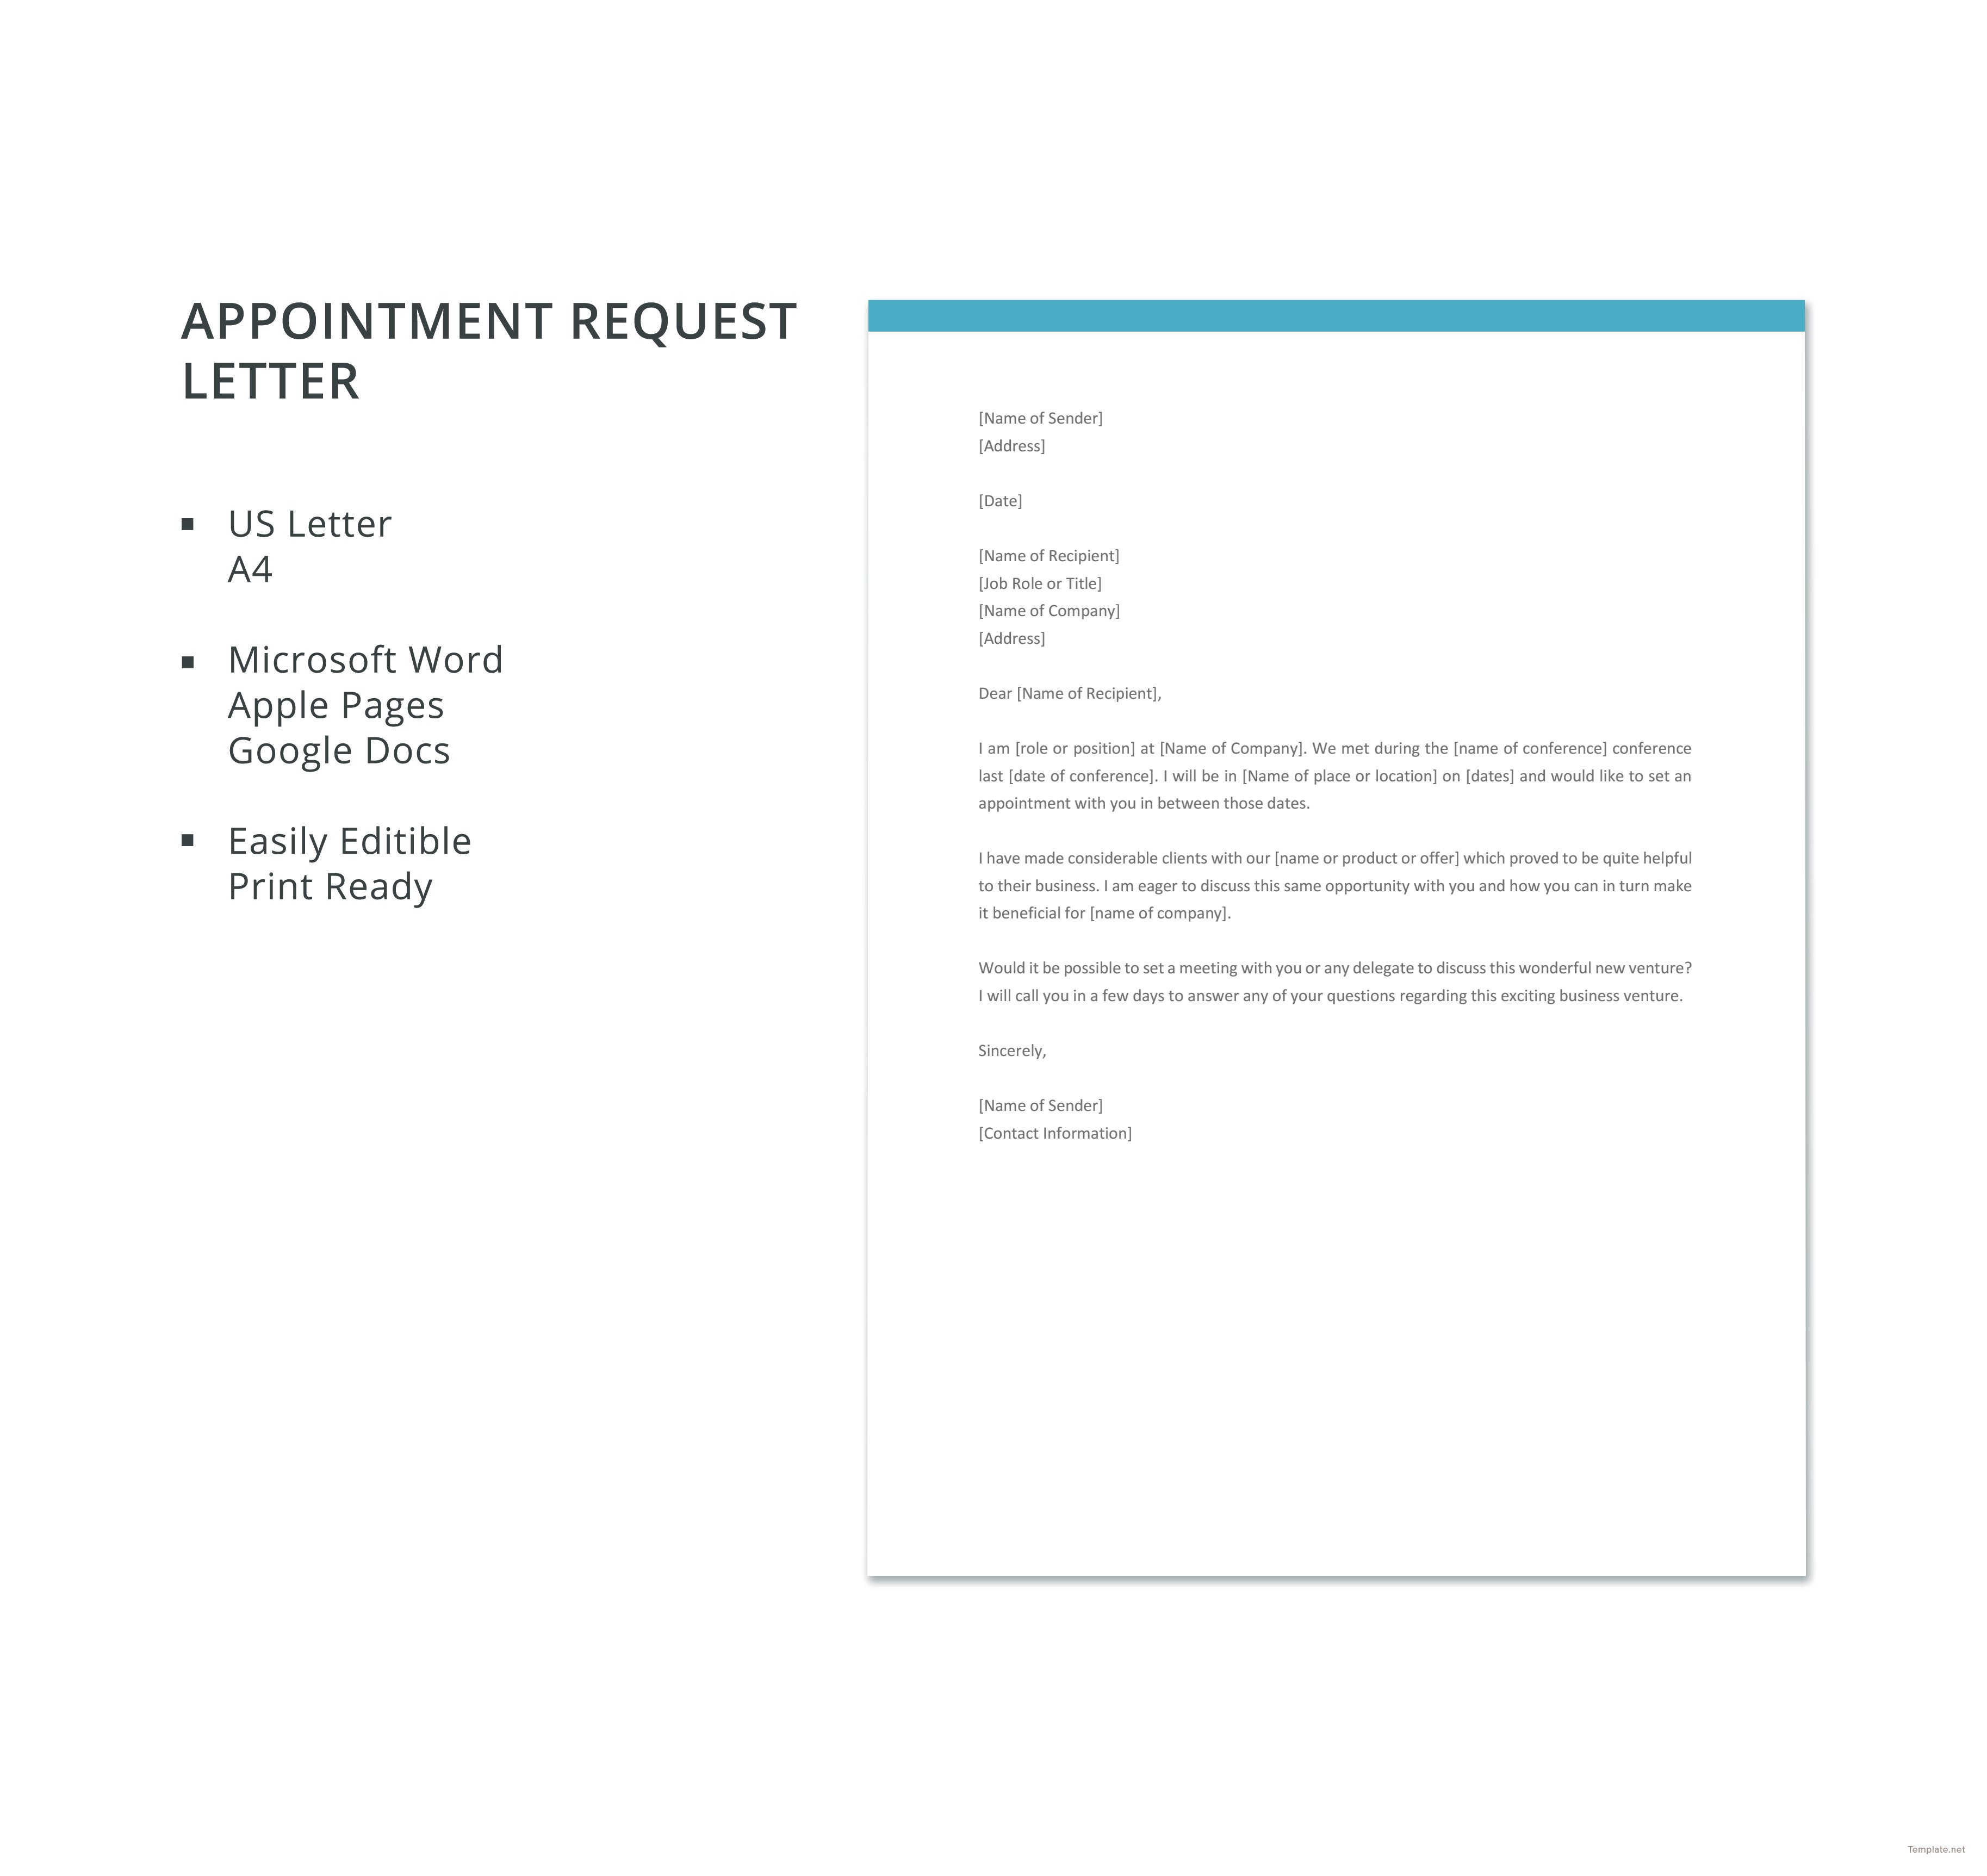 Free Appointment Request Letter Template in Microsoft Word, Apple Pages